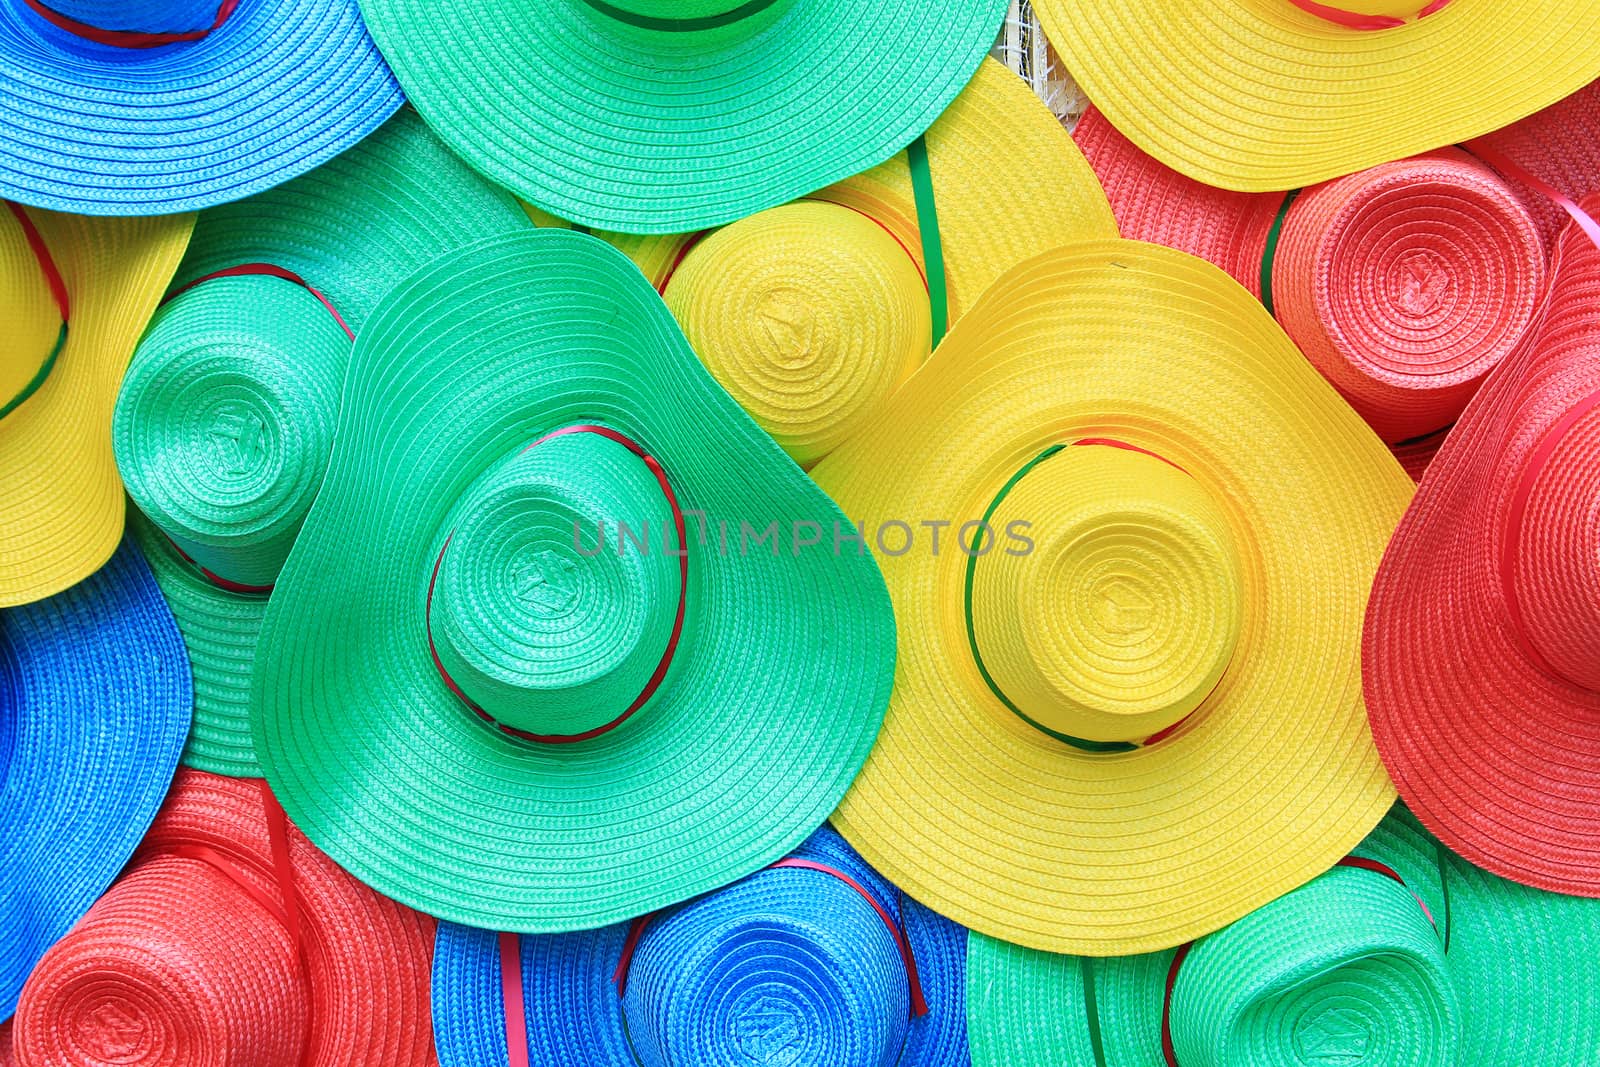 Colorful hats background